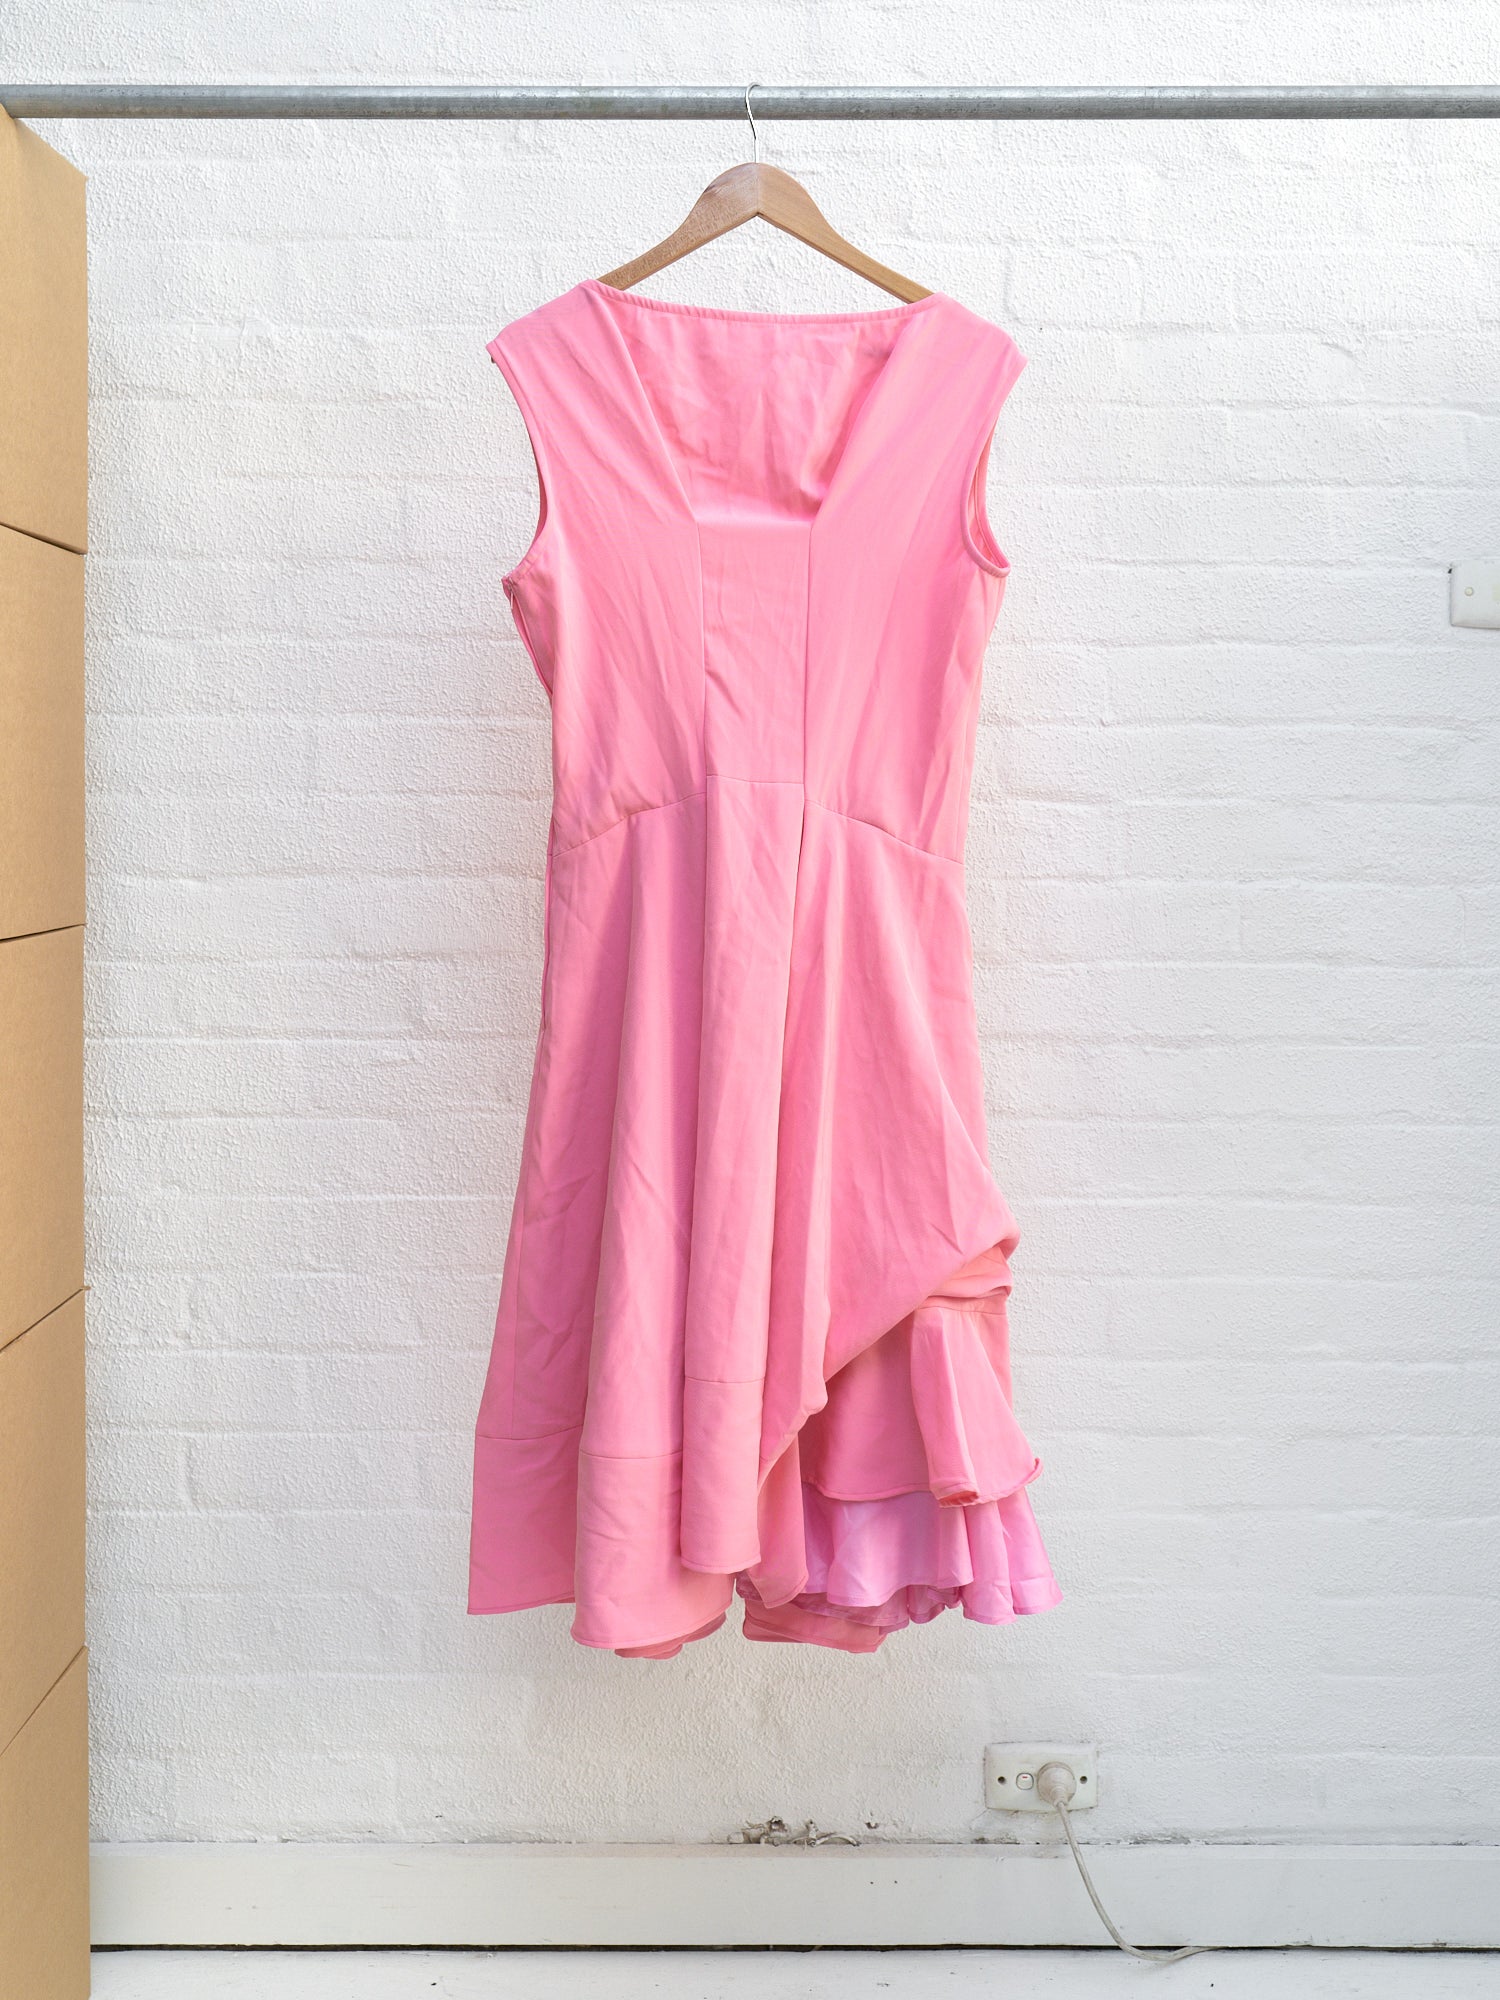 Comme des Garcons 1995 pink polyester flared ruffled sleeveless dress - size M